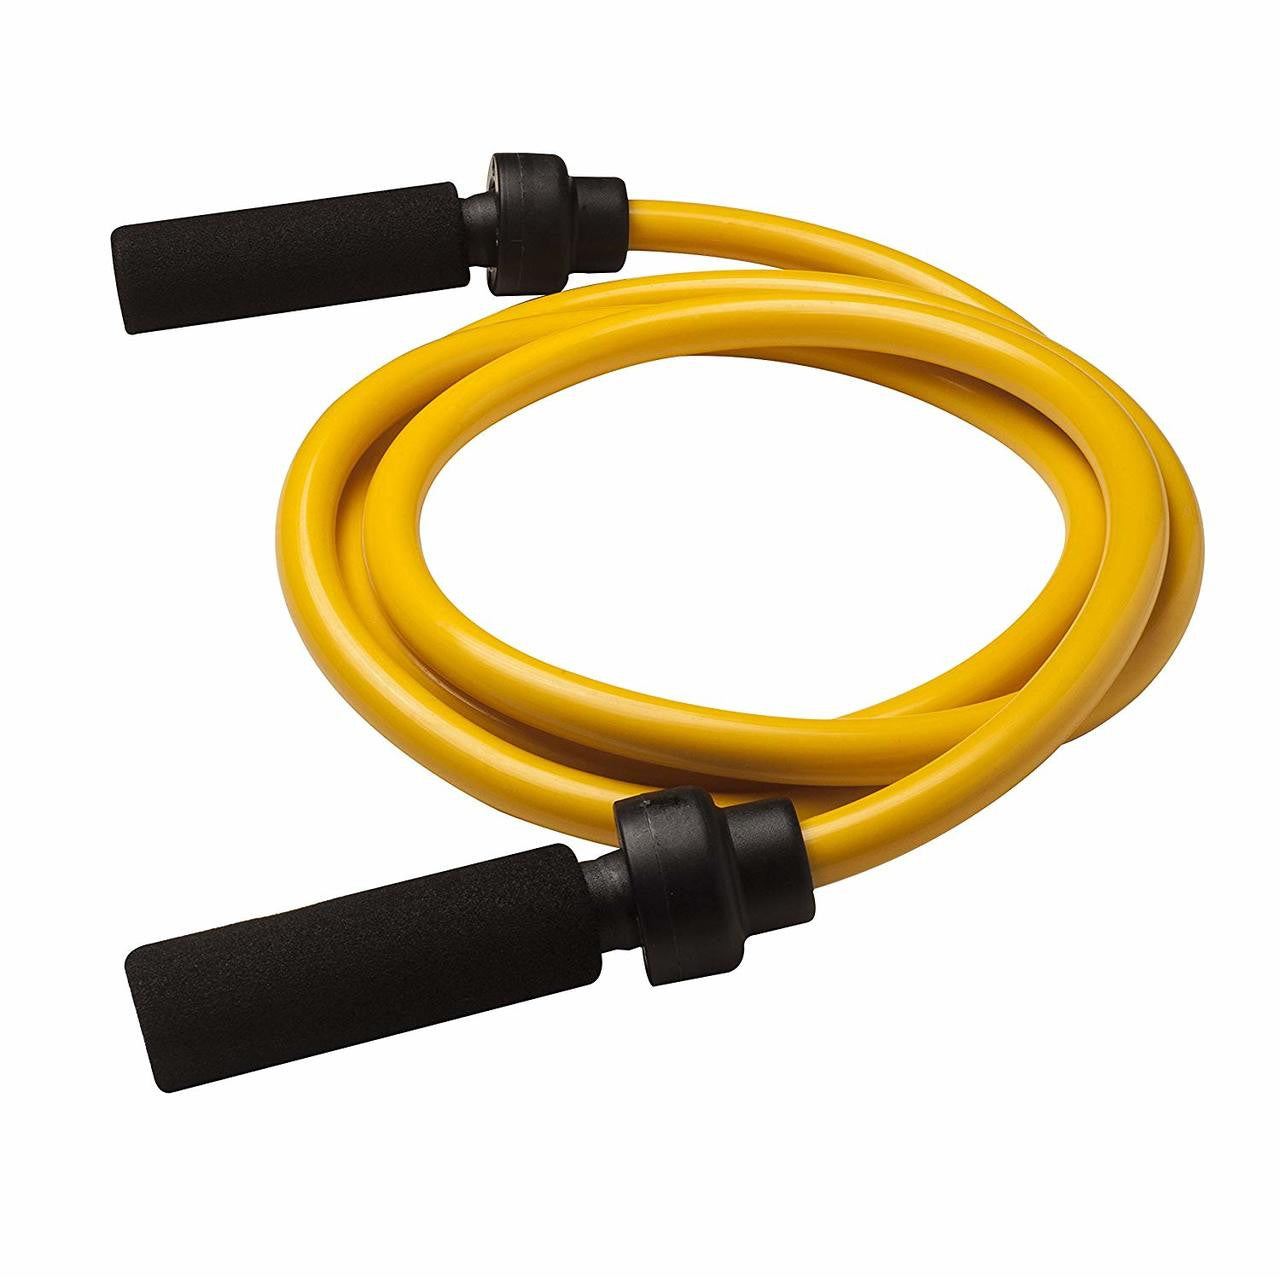 3 lb weighted jump rope